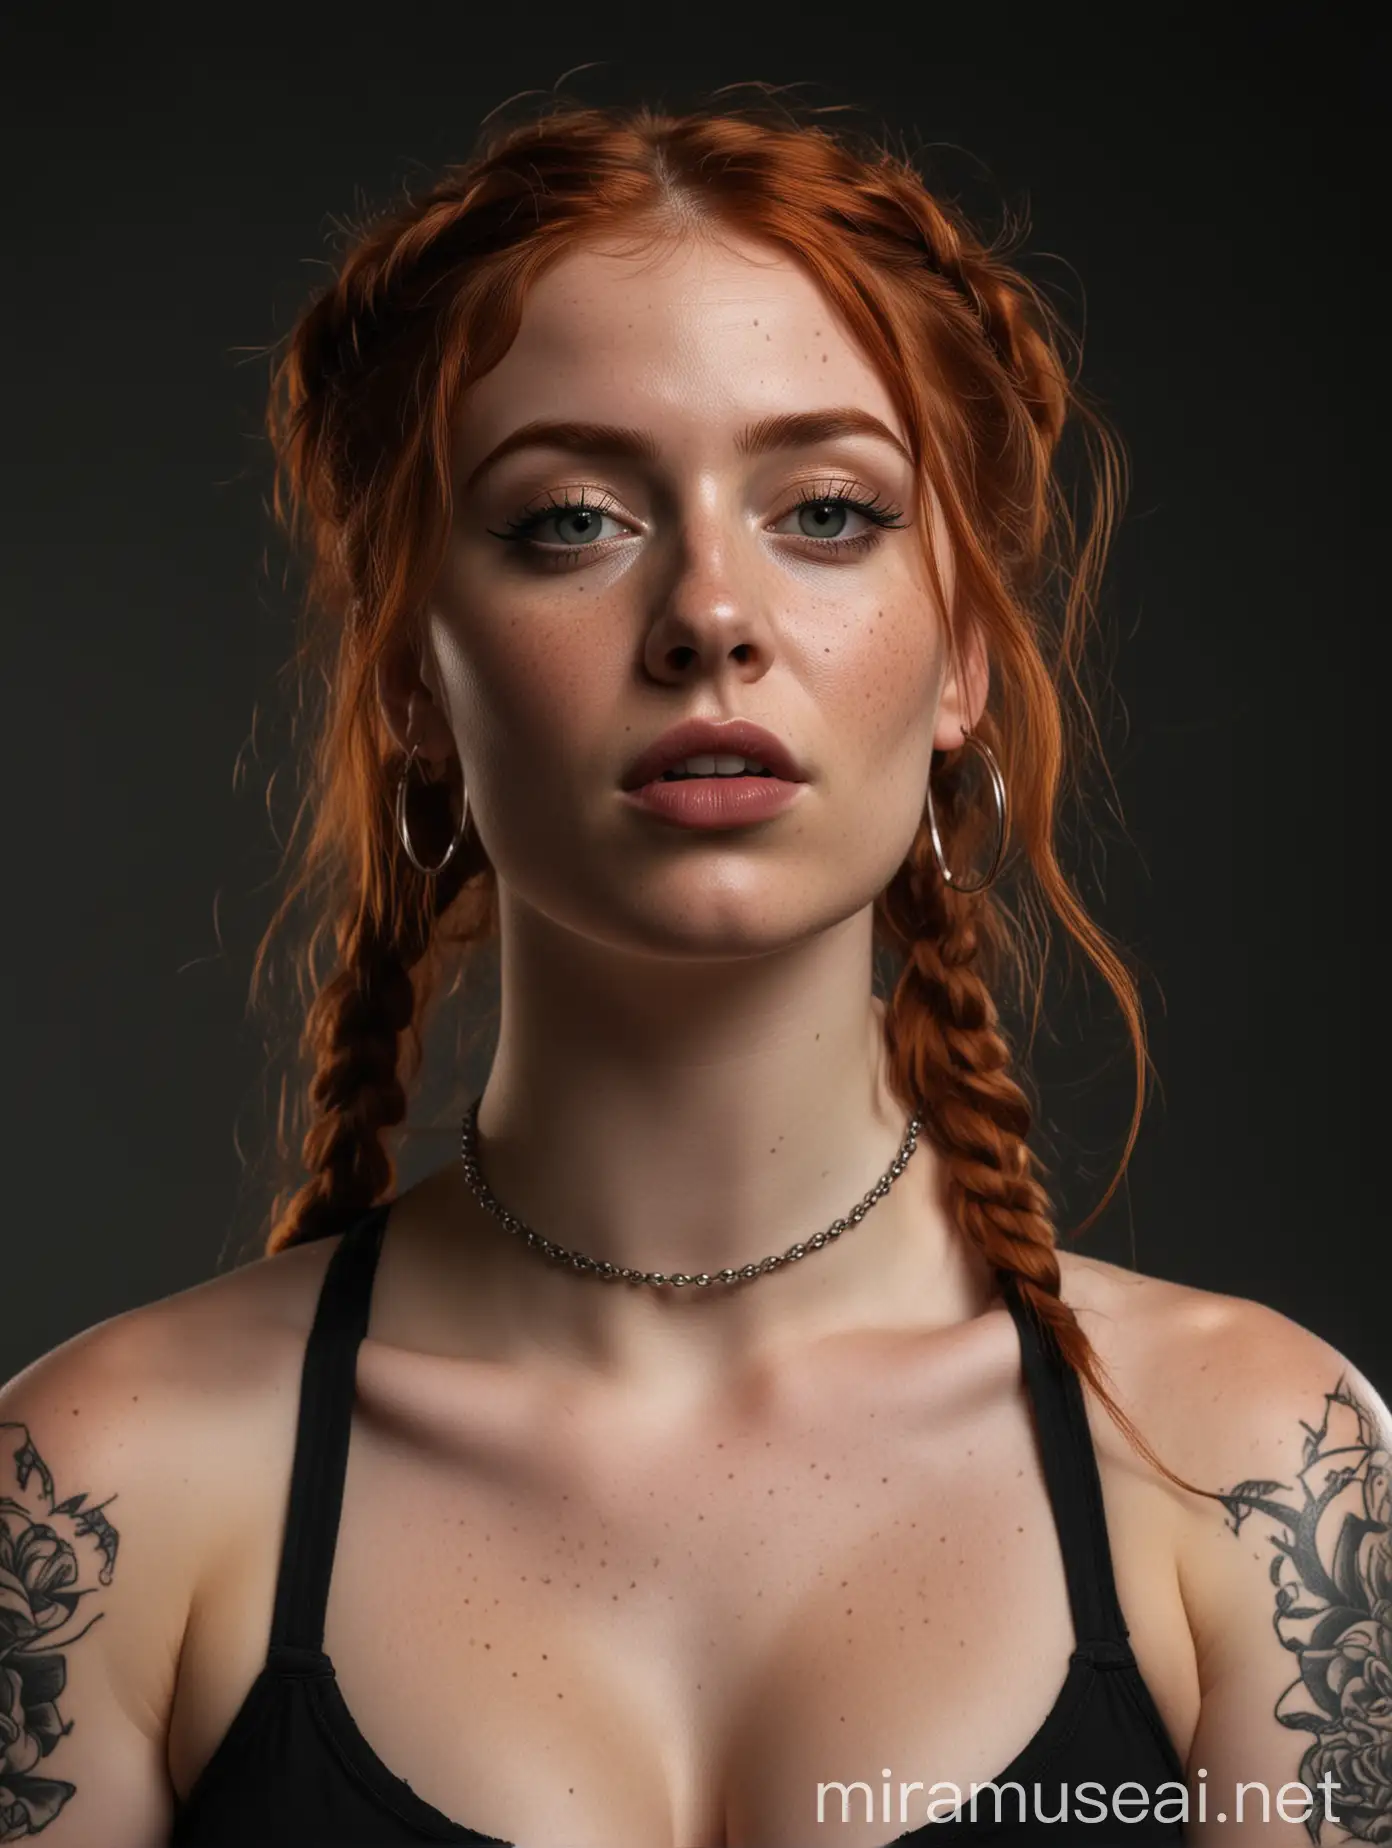 Realistic Photo, Renaissance pose, Woman, shinning light, freckles, redhead, braids, chubby, tattoos, hoop earrings, black tank top, BLACK lipstick,  TATTOOS, angry expression, dark background,